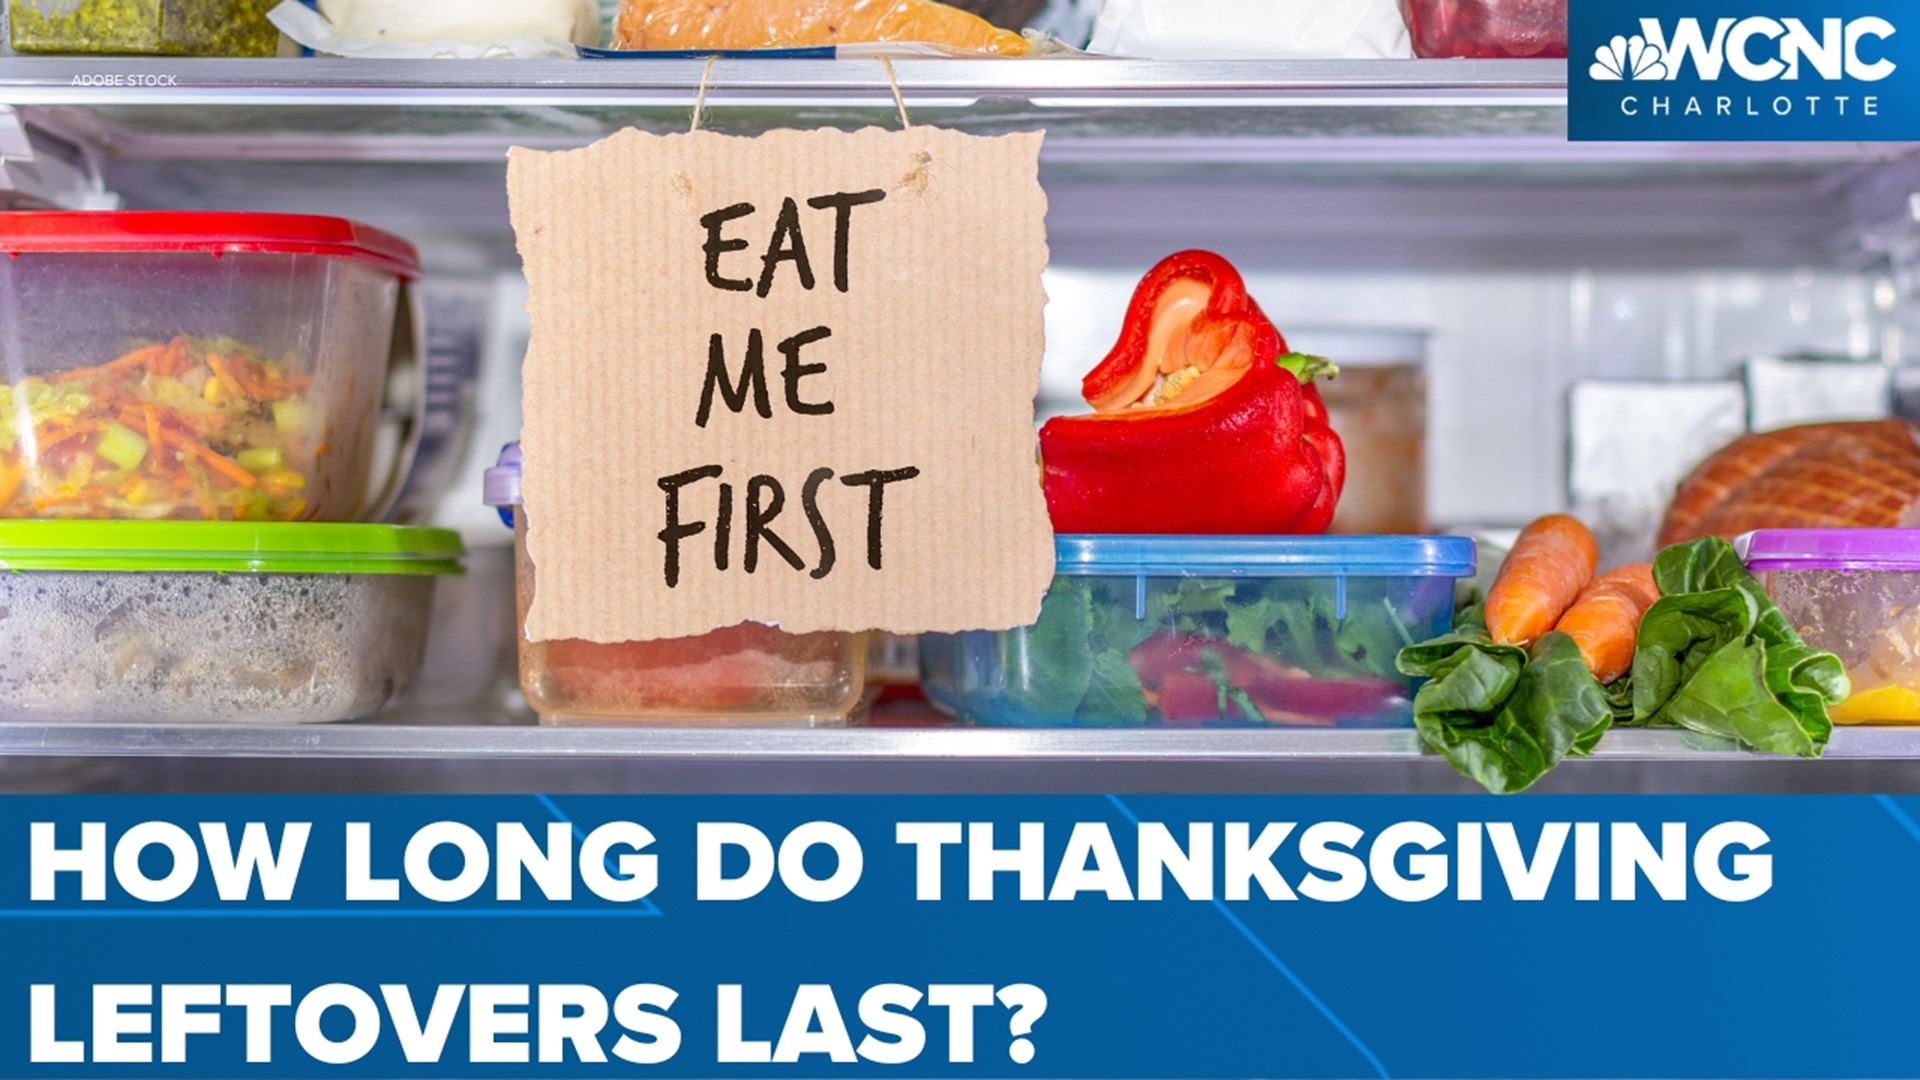 The USDA says the Monday after Thanksgiving is the last day you can eat leftovers safely.